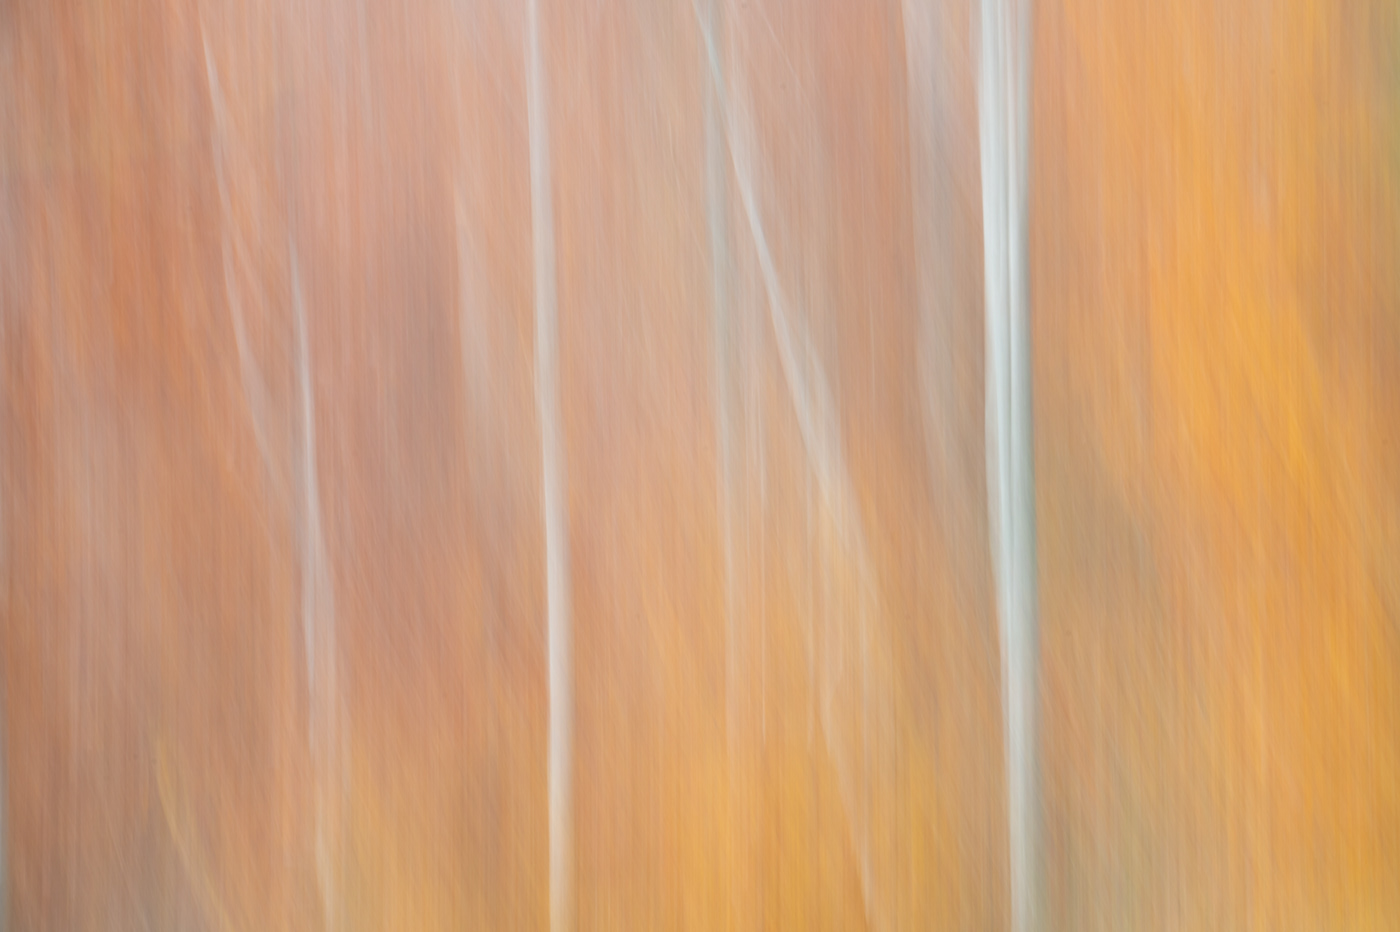 Abstract Art autunno fine art foliage landcape Nature Outdoor Photography 